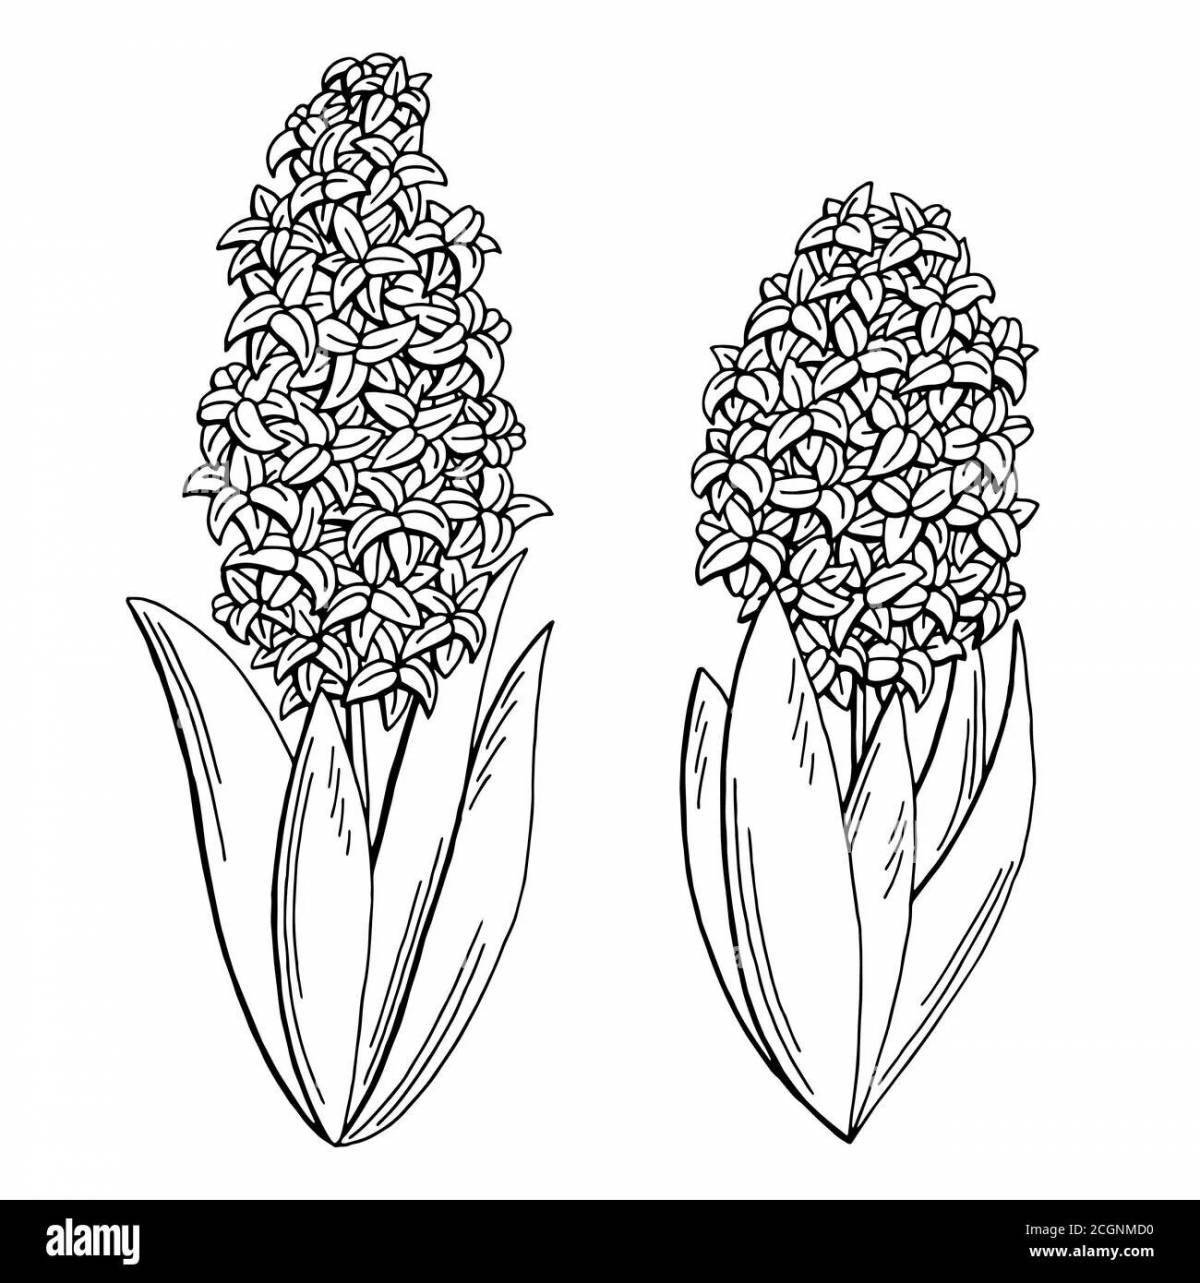 Glowing orchis coloring book